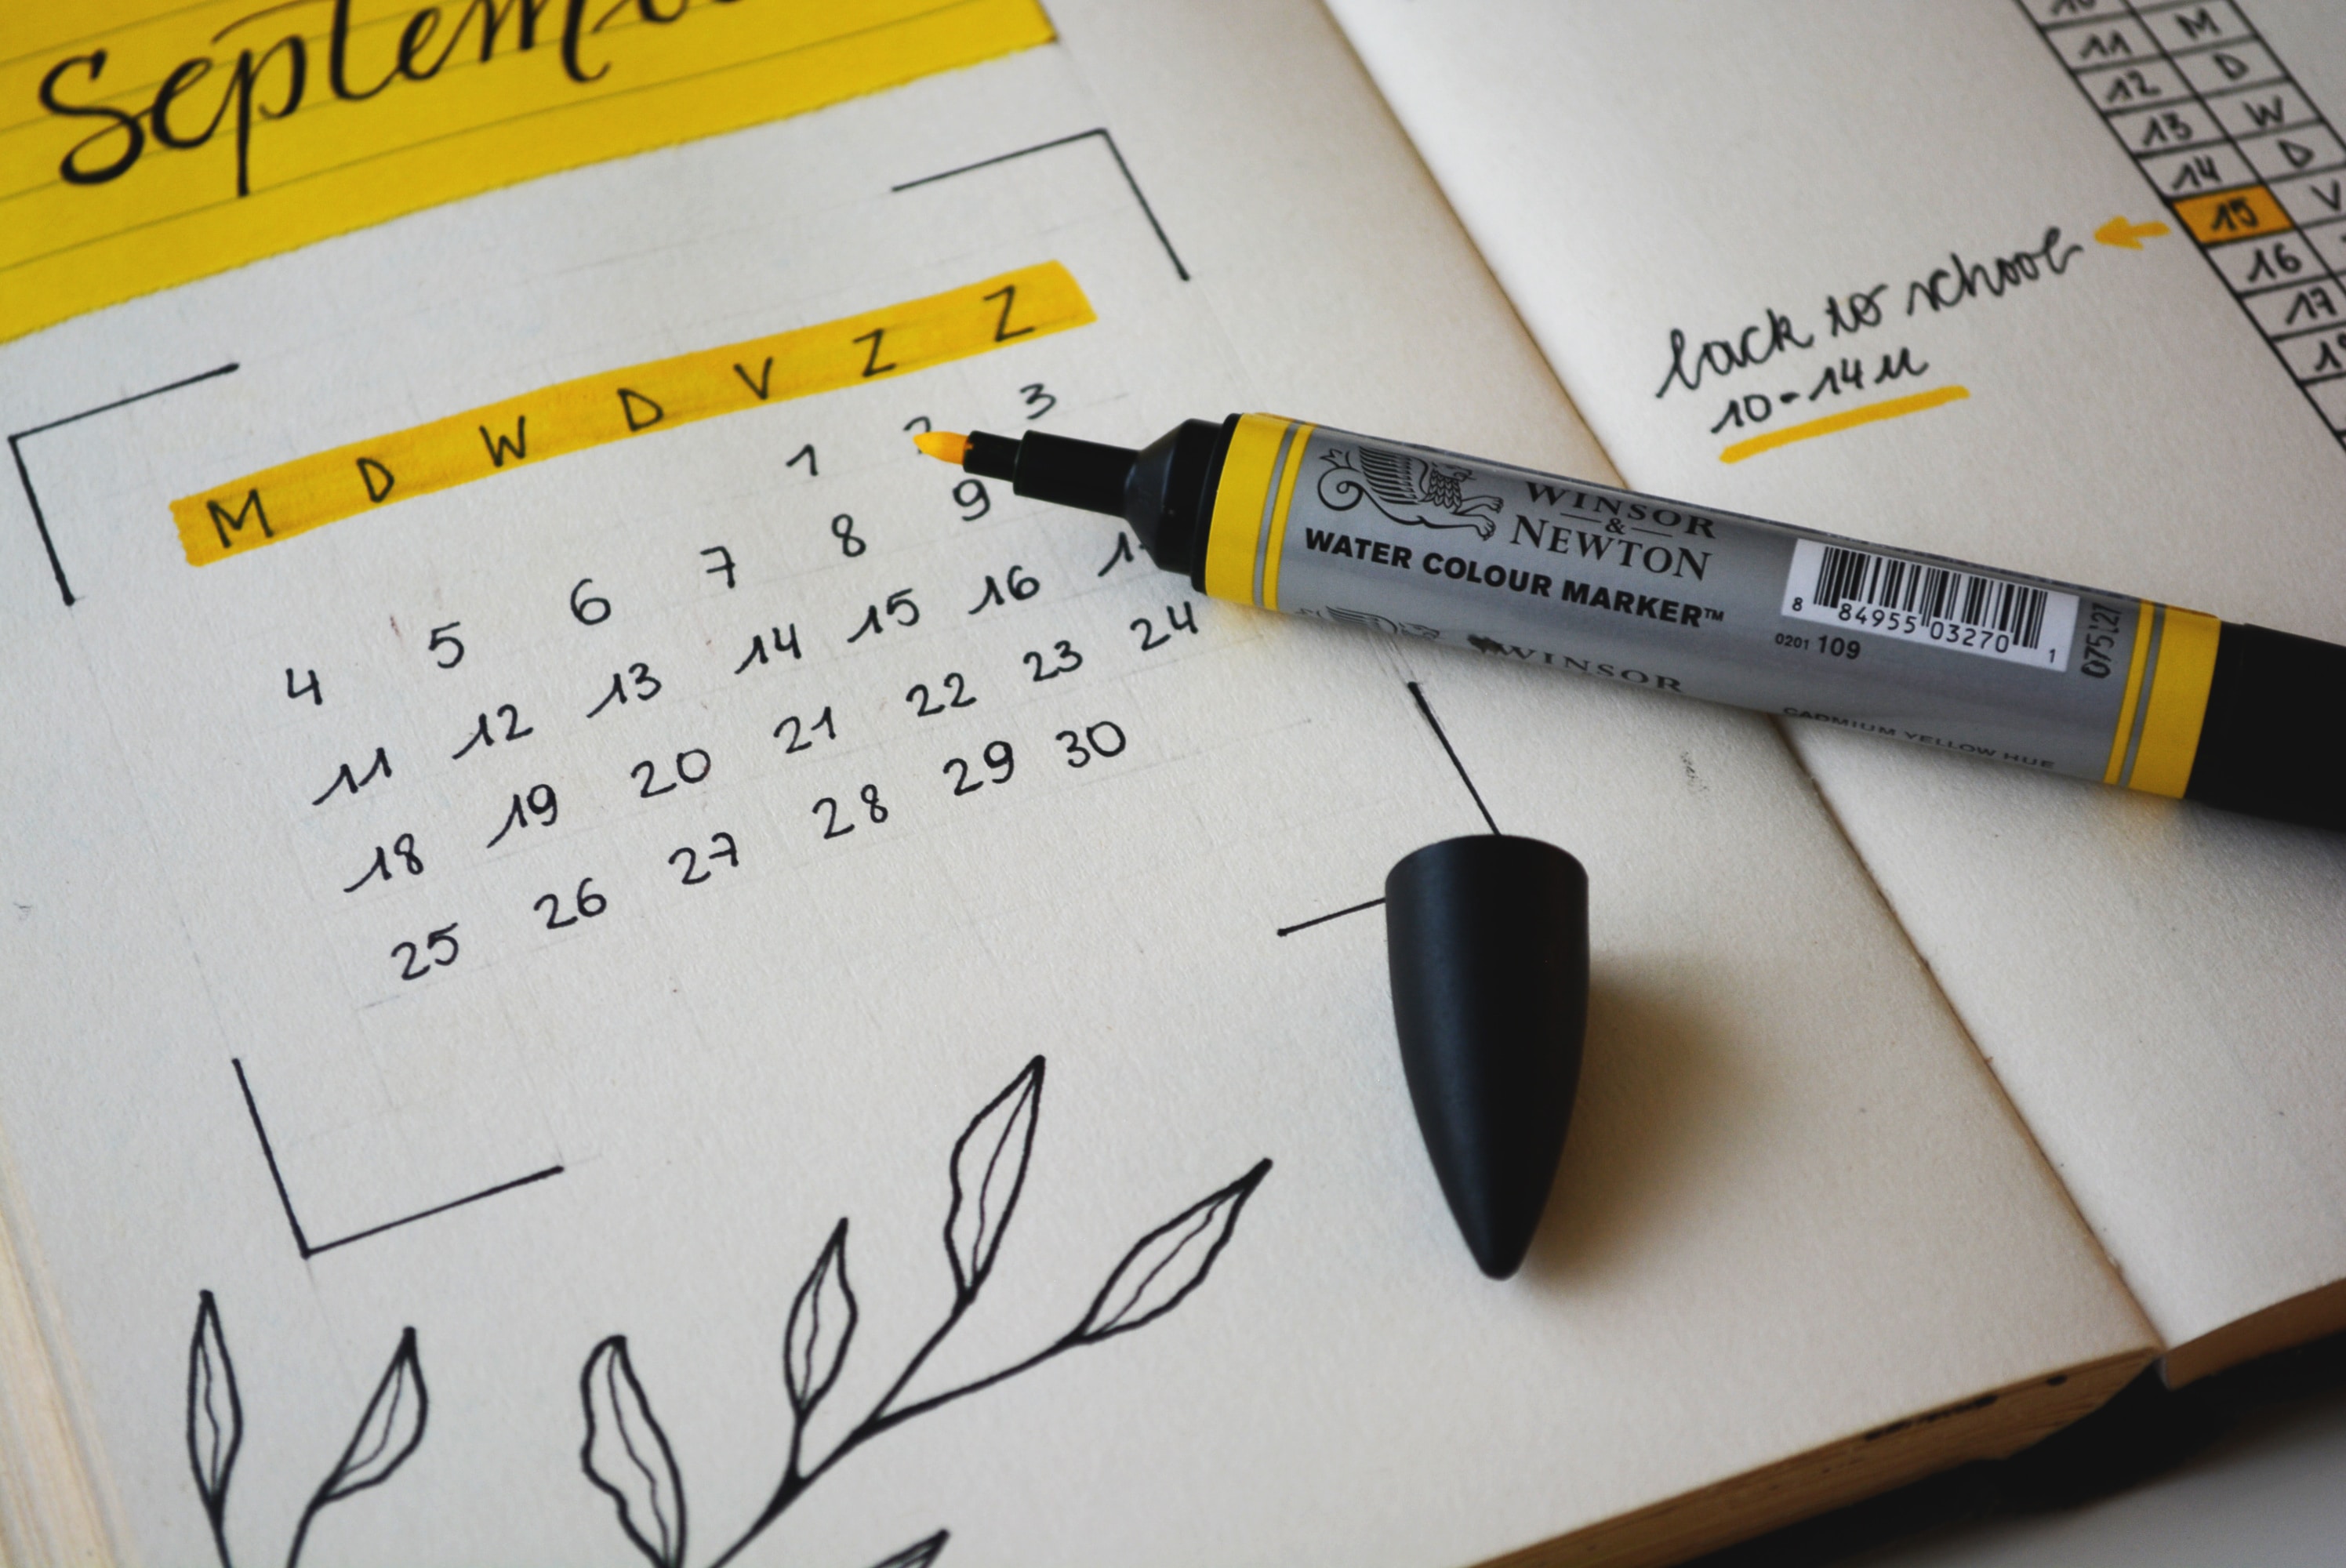 Monthly planner with splash of yellow.